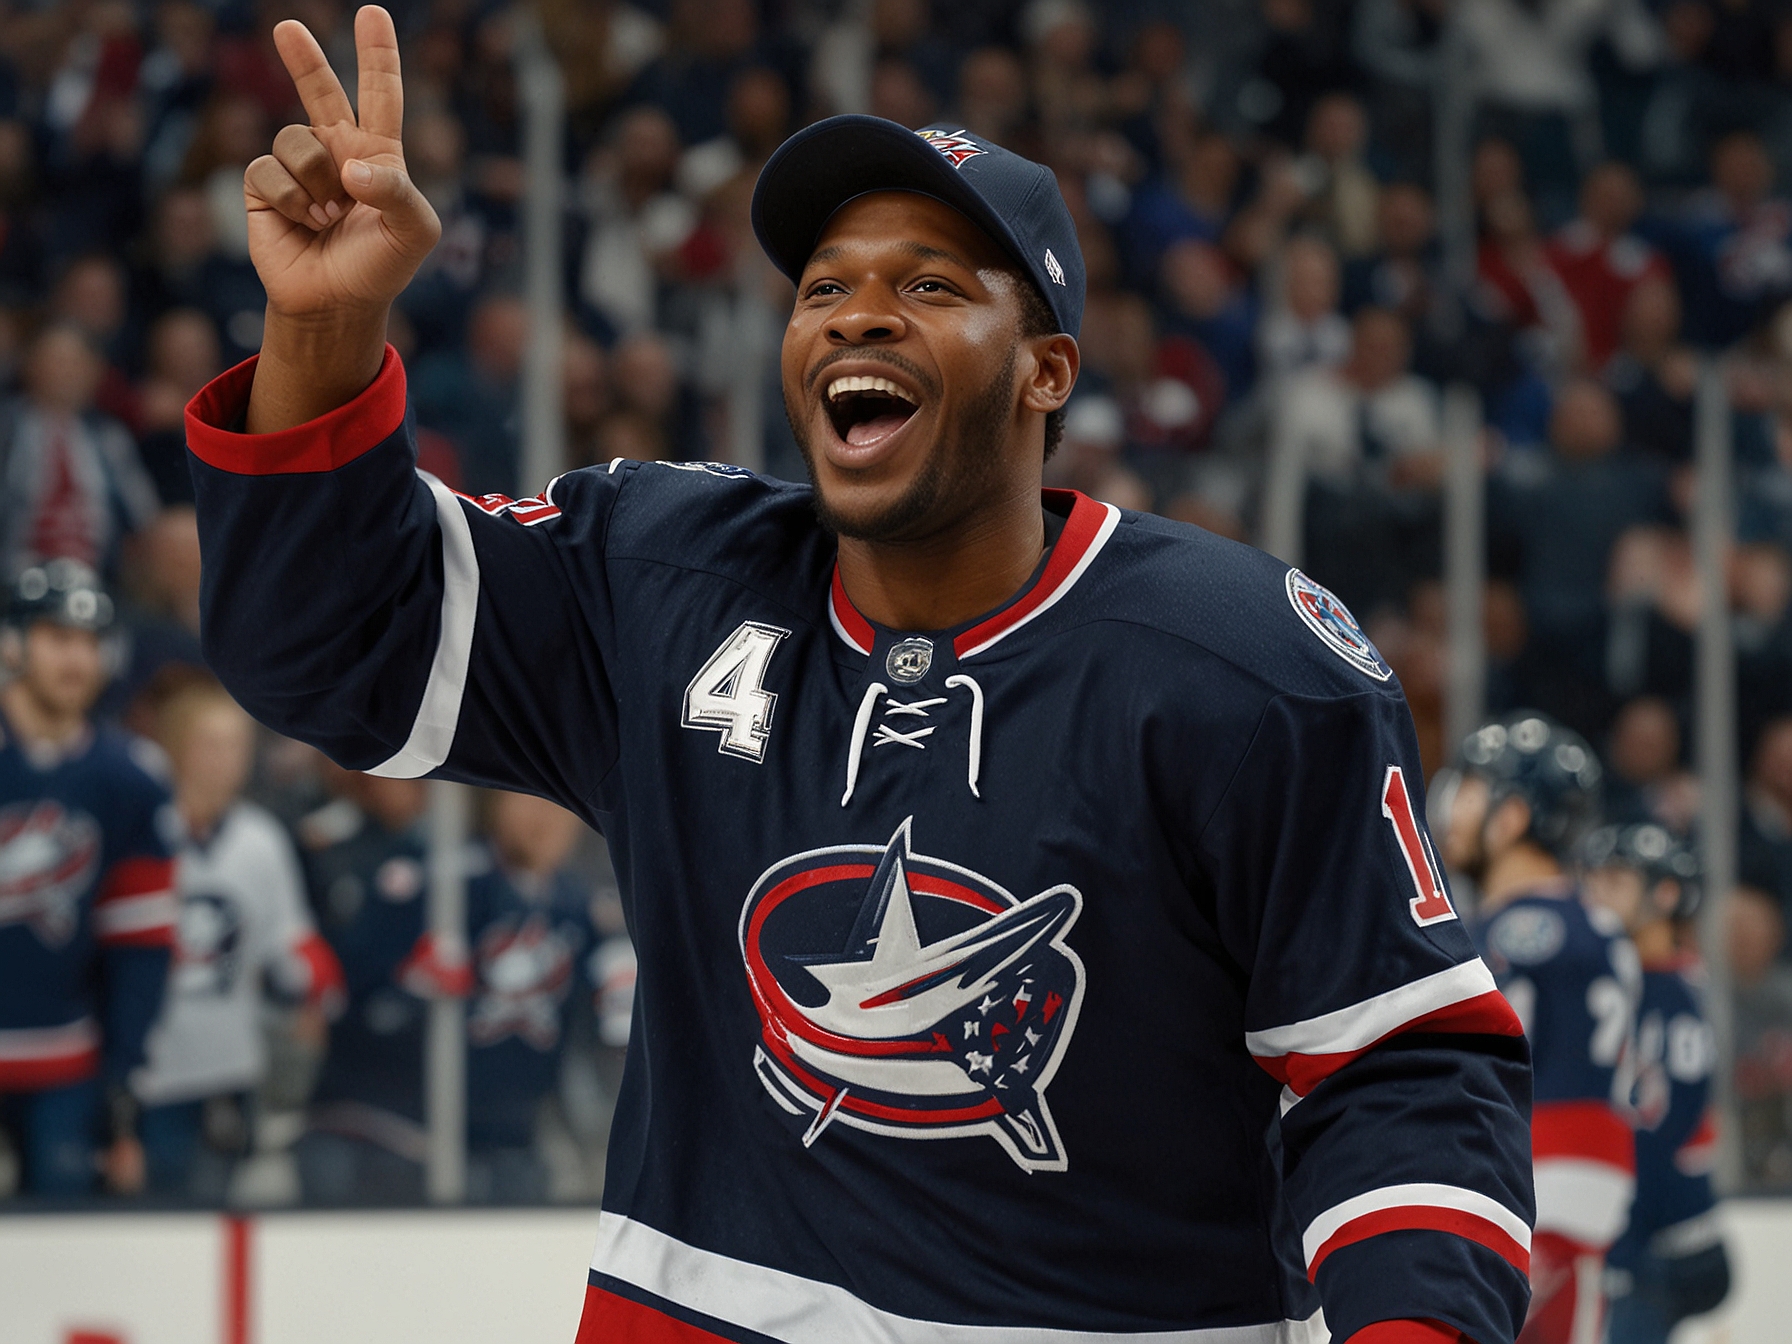 Veteran defenceman Jack Johnson, in his Columbus Blue Jackets uniform, celebrates after a triumphant goal, reflecting his return and the excitement among fans and teammates.